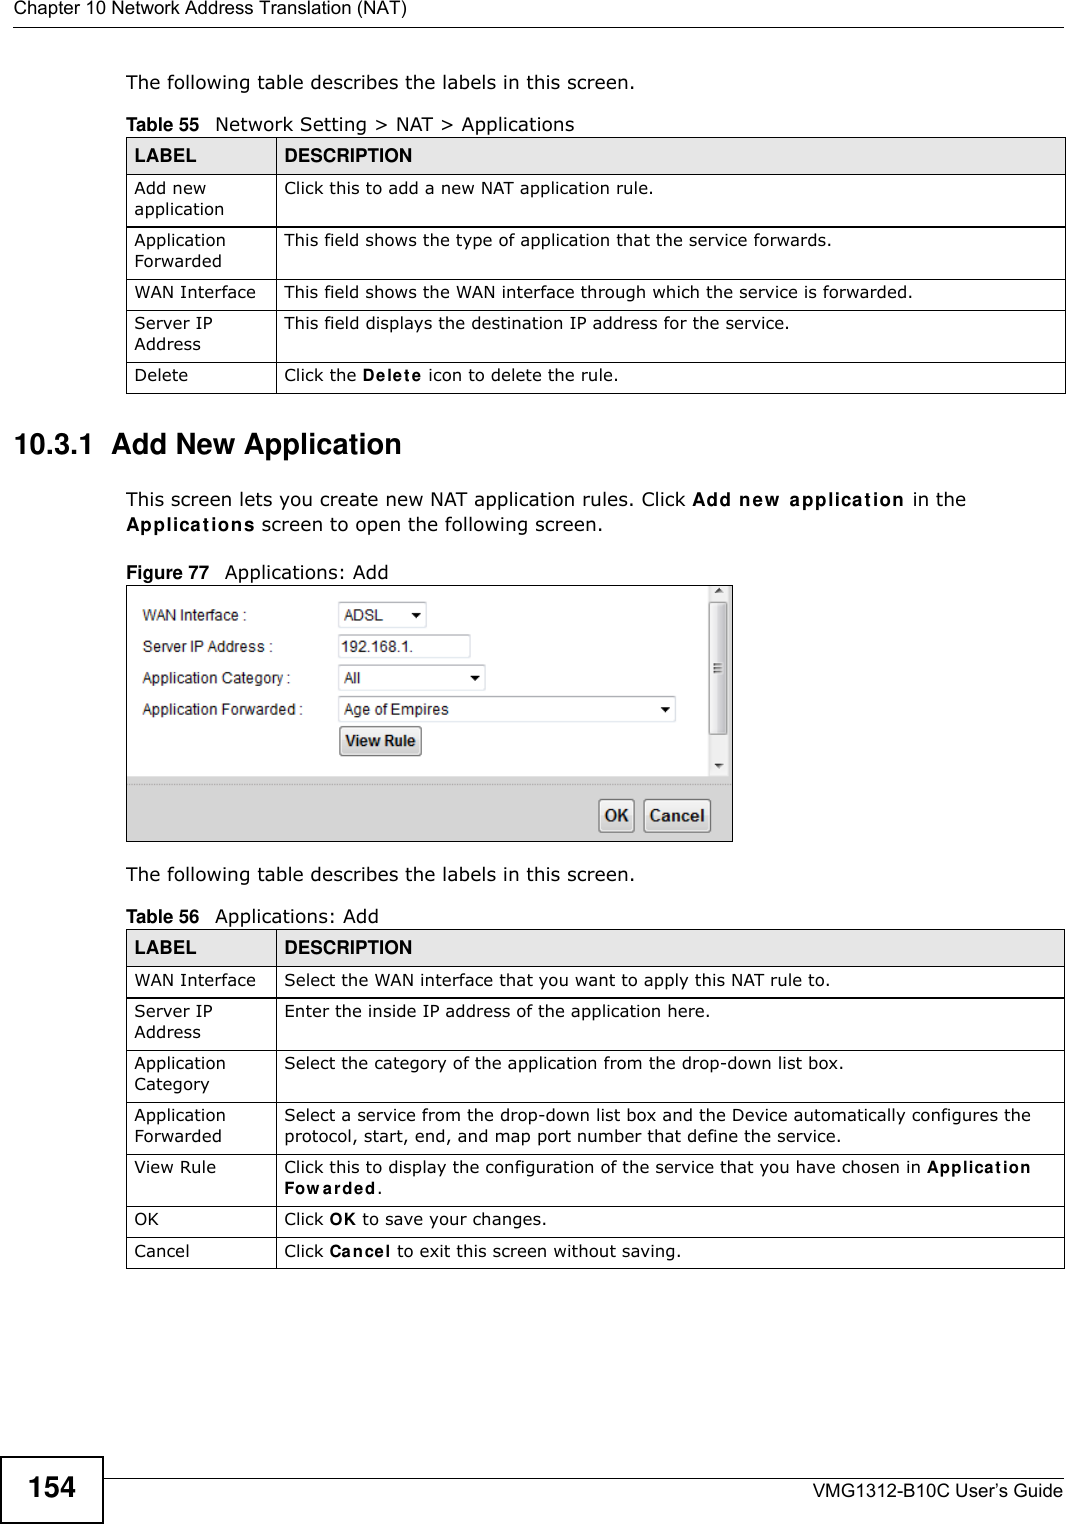 Chapter 10 Network Address Translation (NAT)VMG1312-B10C User’s Guide154The following table describes the labels in this screen. 10.3.1  Add New ApplicationThis screen lets you create new NAT application rules. Click Add n e w  applicat ion  in the Applicat ions screen to open the following screen.Figure 77   Applications: Add The following table describes the labels in this screen. Table 55   Network Setting &gt; NAT &gt; ApplicationsLABEL DESCRIPTIONAdd new applicationClick this to add a new NAT application rule.Application ForwardedThis field shows the type of application that the service forwards.WAN Interface This field shows the WAN interface through which the service is forwarded.Server IP AddressThis field displays the destination IP address for the service.Delete Click the De let e  icon to delete the rule.Table 56   Applications: AddLABEL DESCRIPTIONWAN Interface Select the WAN interface that you want to apply this NAT rule to.Server IP AddressEnter the inside IP address of the application here.Application CategorySelect the category of the application from the drop-down list box.Application ForwardedSelect a service from the drop-down list box and the Device automatically configures the protocol, start, end, and map port number that define the service.View Rule Click this to display the configuration of the service that you have chosen in Applica t ion Fow a rded.OK Click OK to save your changes.Cancel Click Cancel to exit this screen without saving.